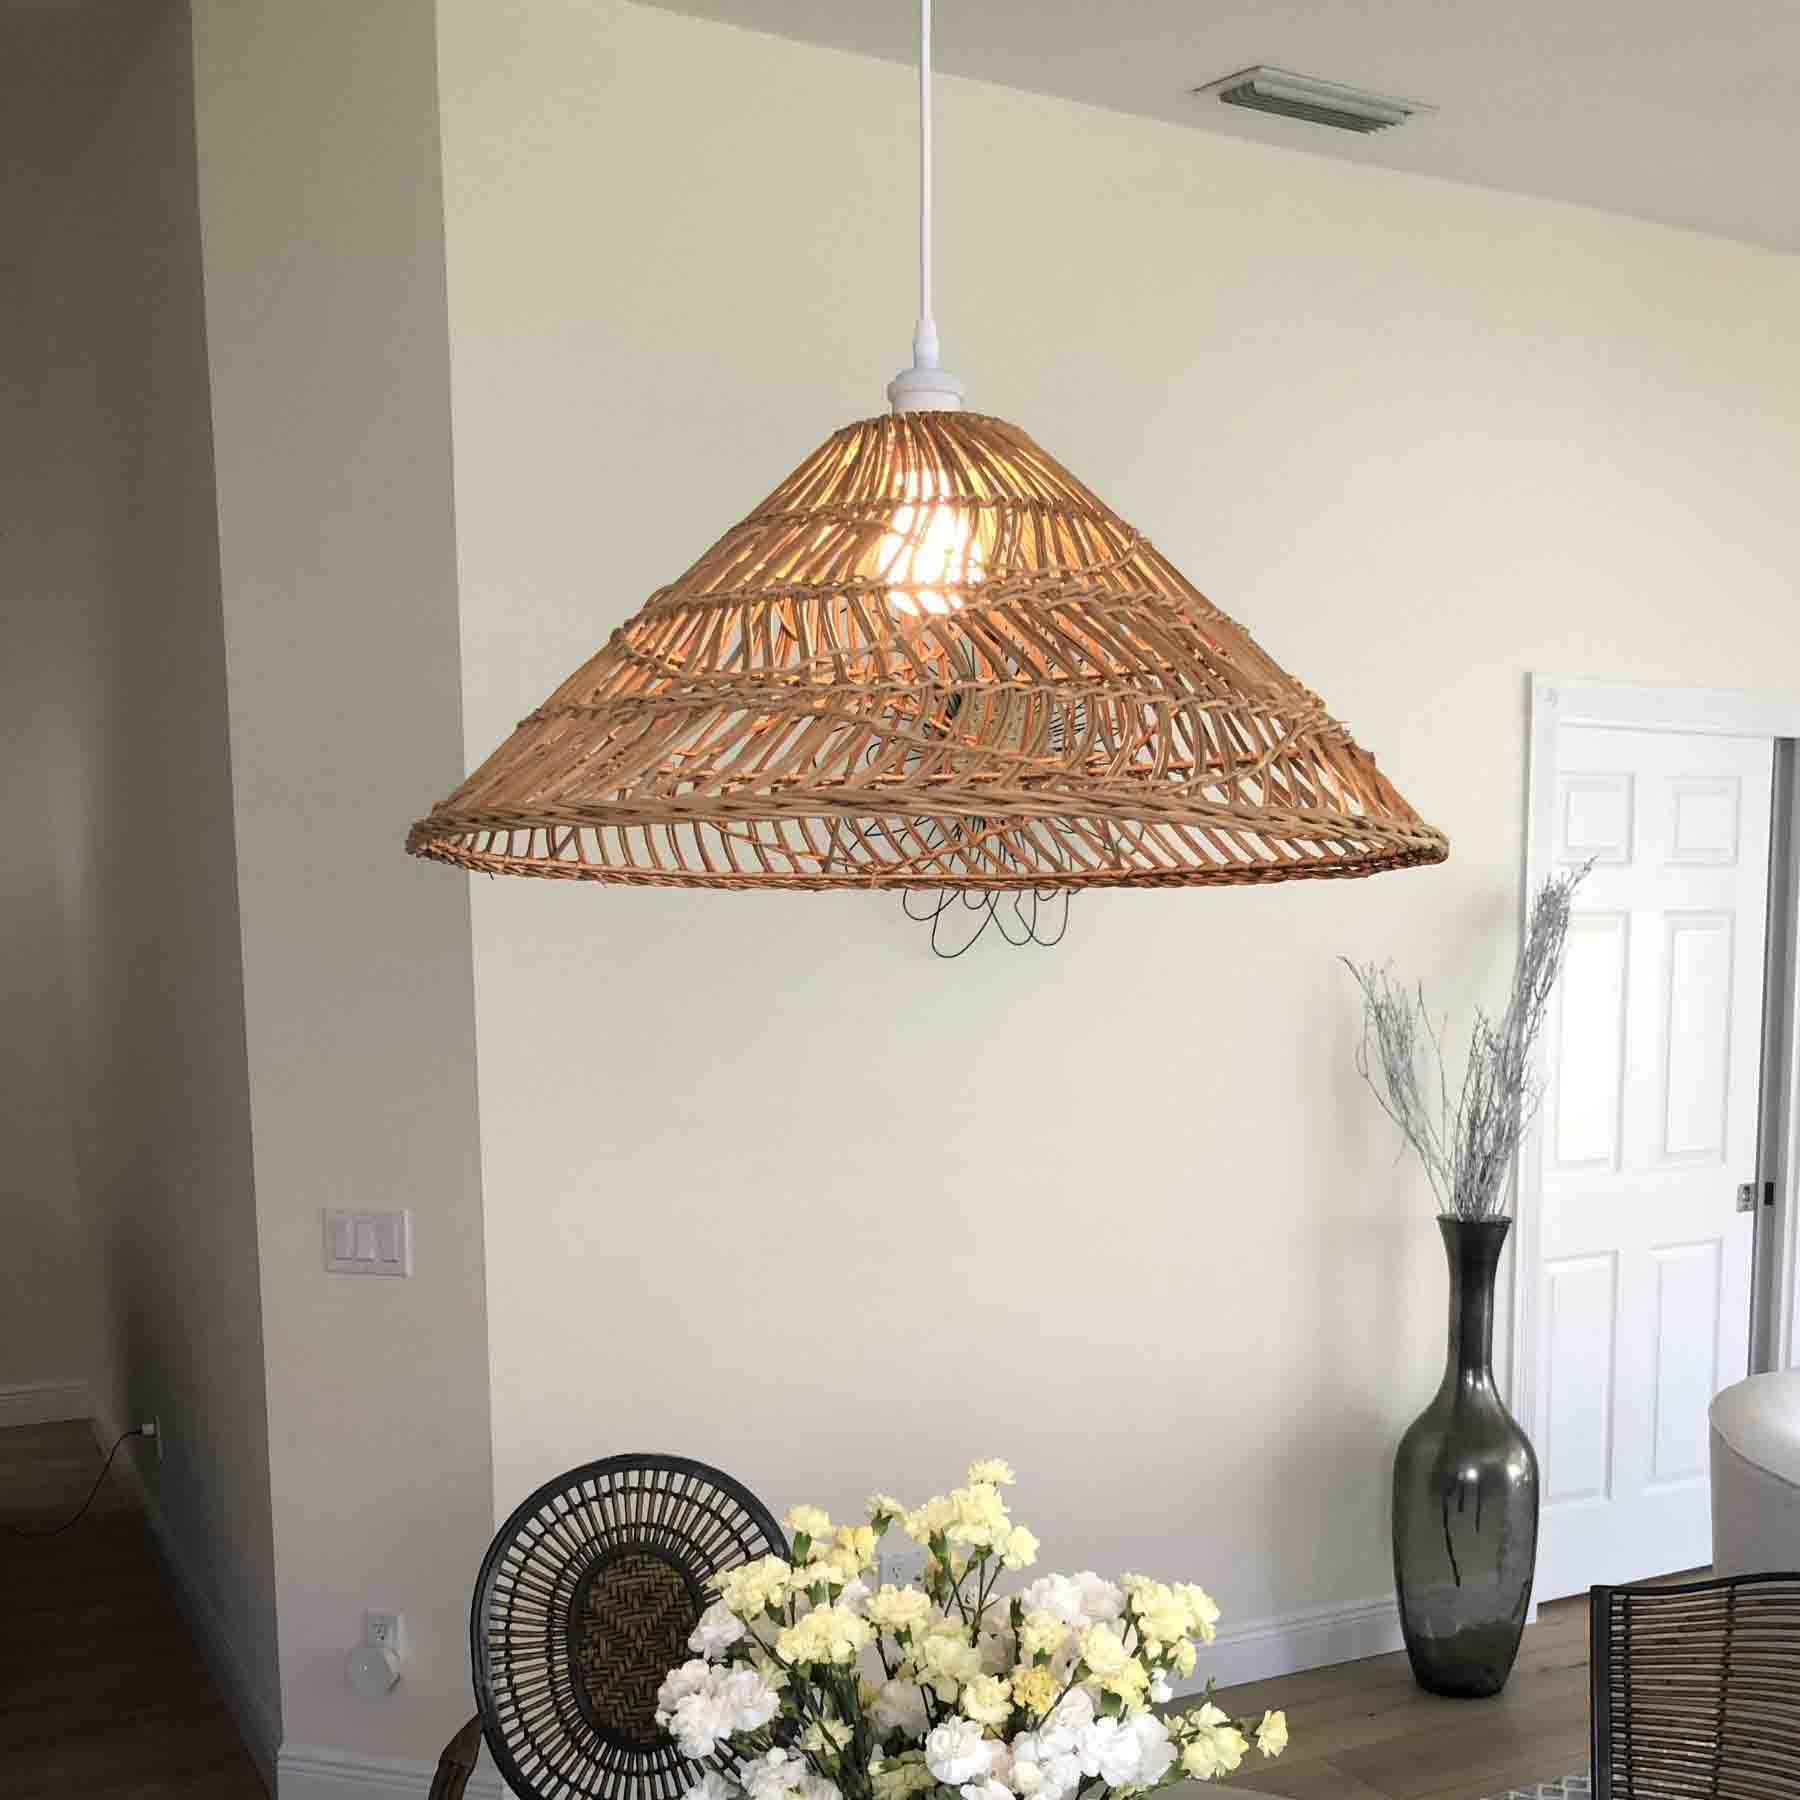 maria was enchanted by the exquisite beauty of our rattan pendant light